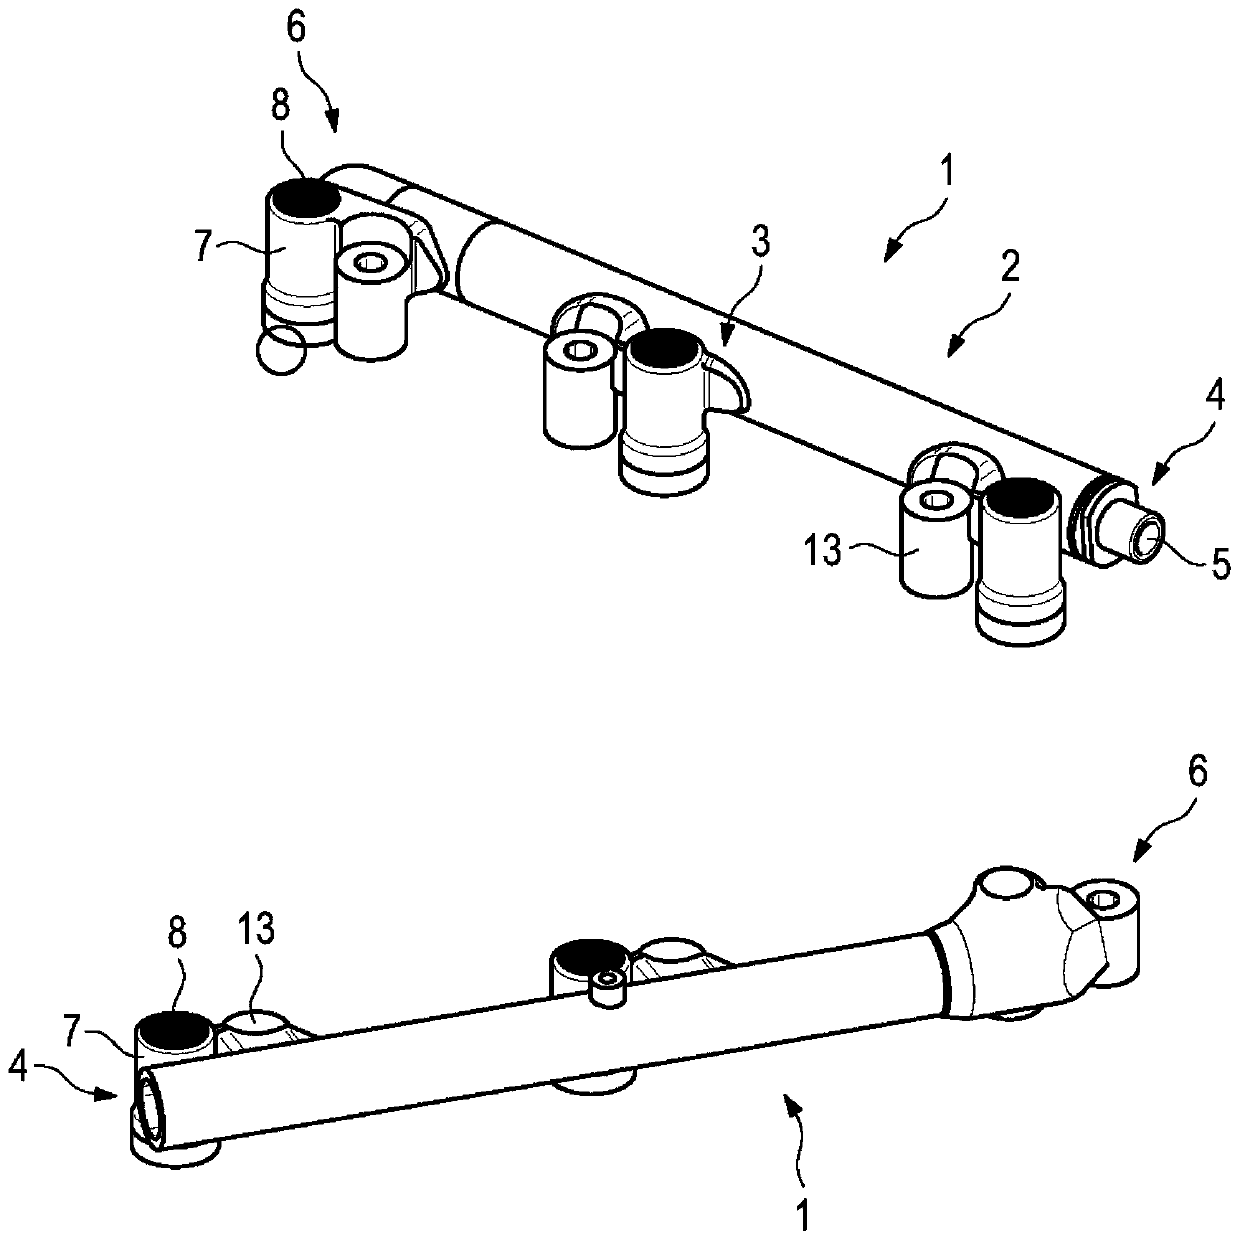 Collecting pressure line for fuel injection system of internal combustion engine